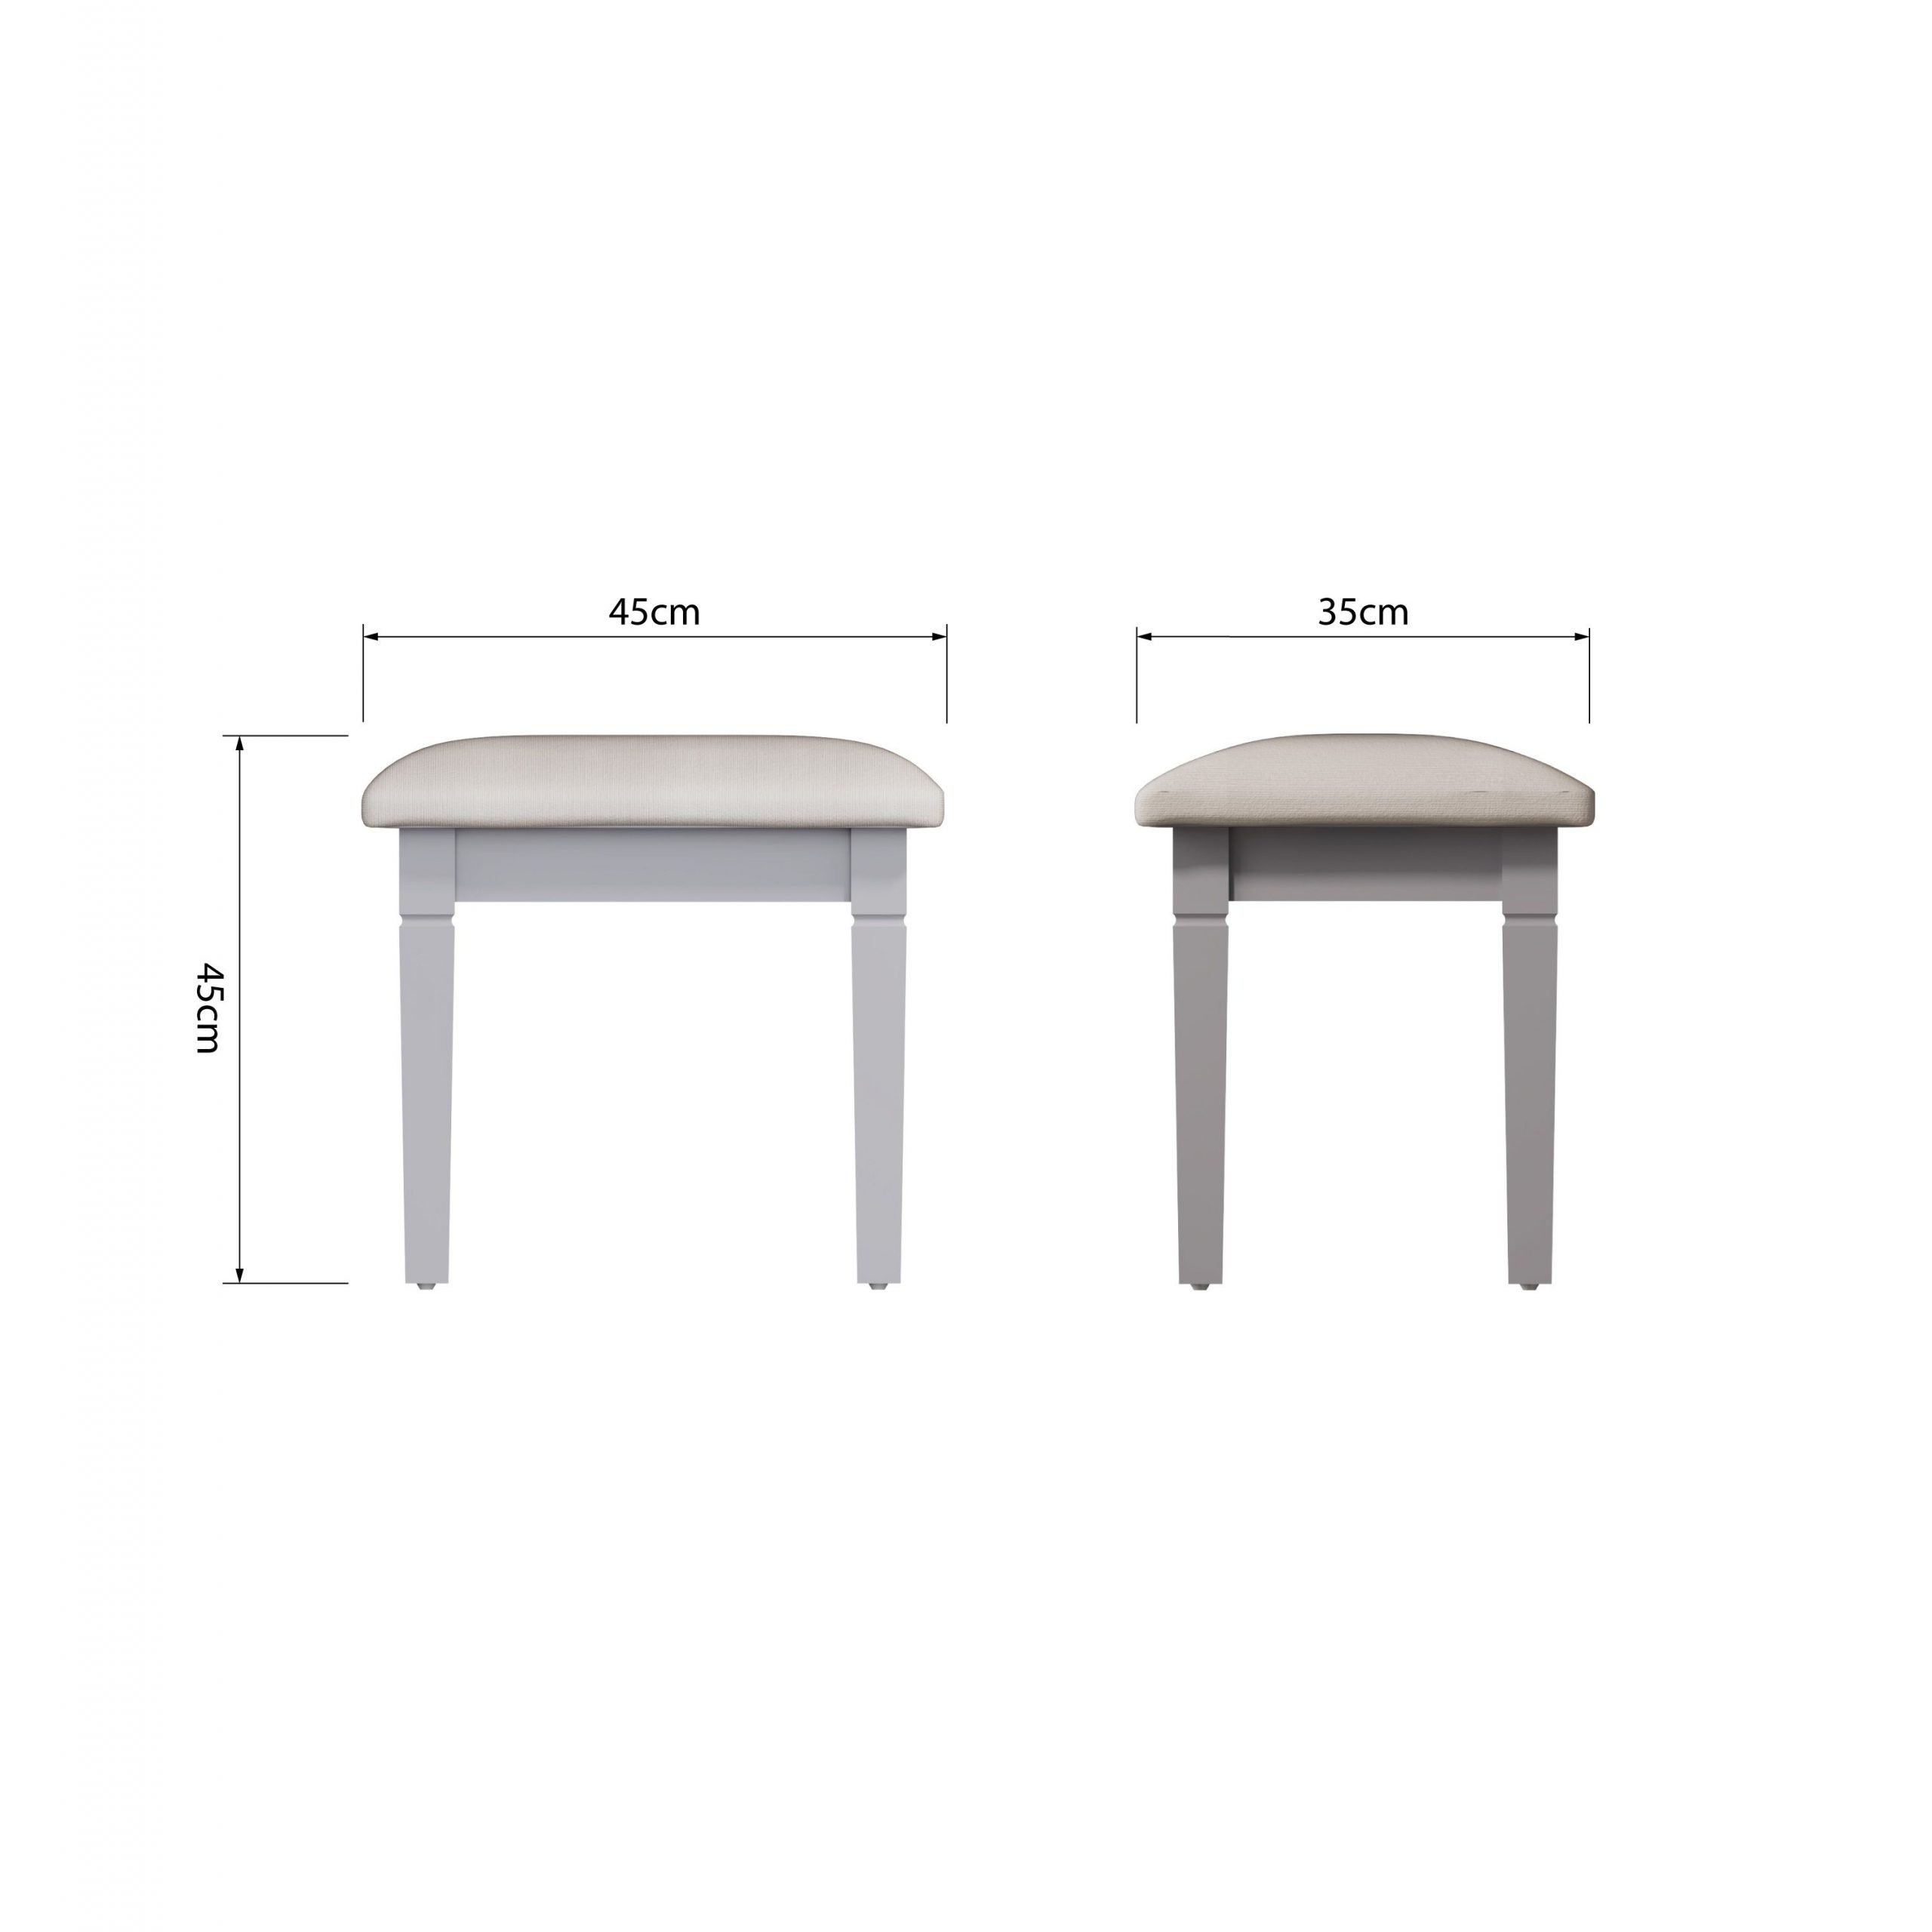 Isabelle Grey Stool dims scaled